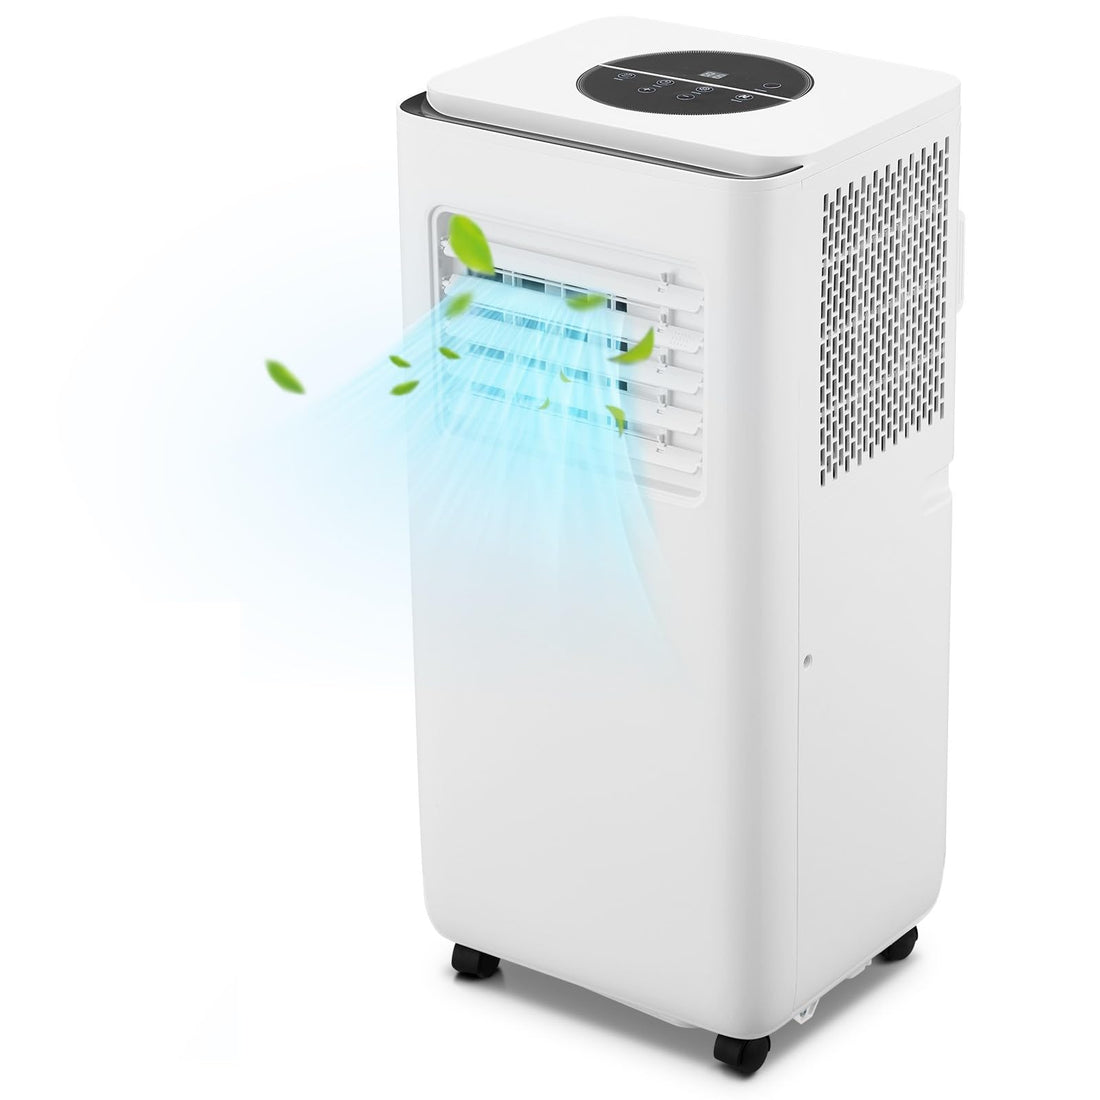 10,000 BTU Portable AC, Cooling up to 450 Sq.Ft, 3-in-1 for Home